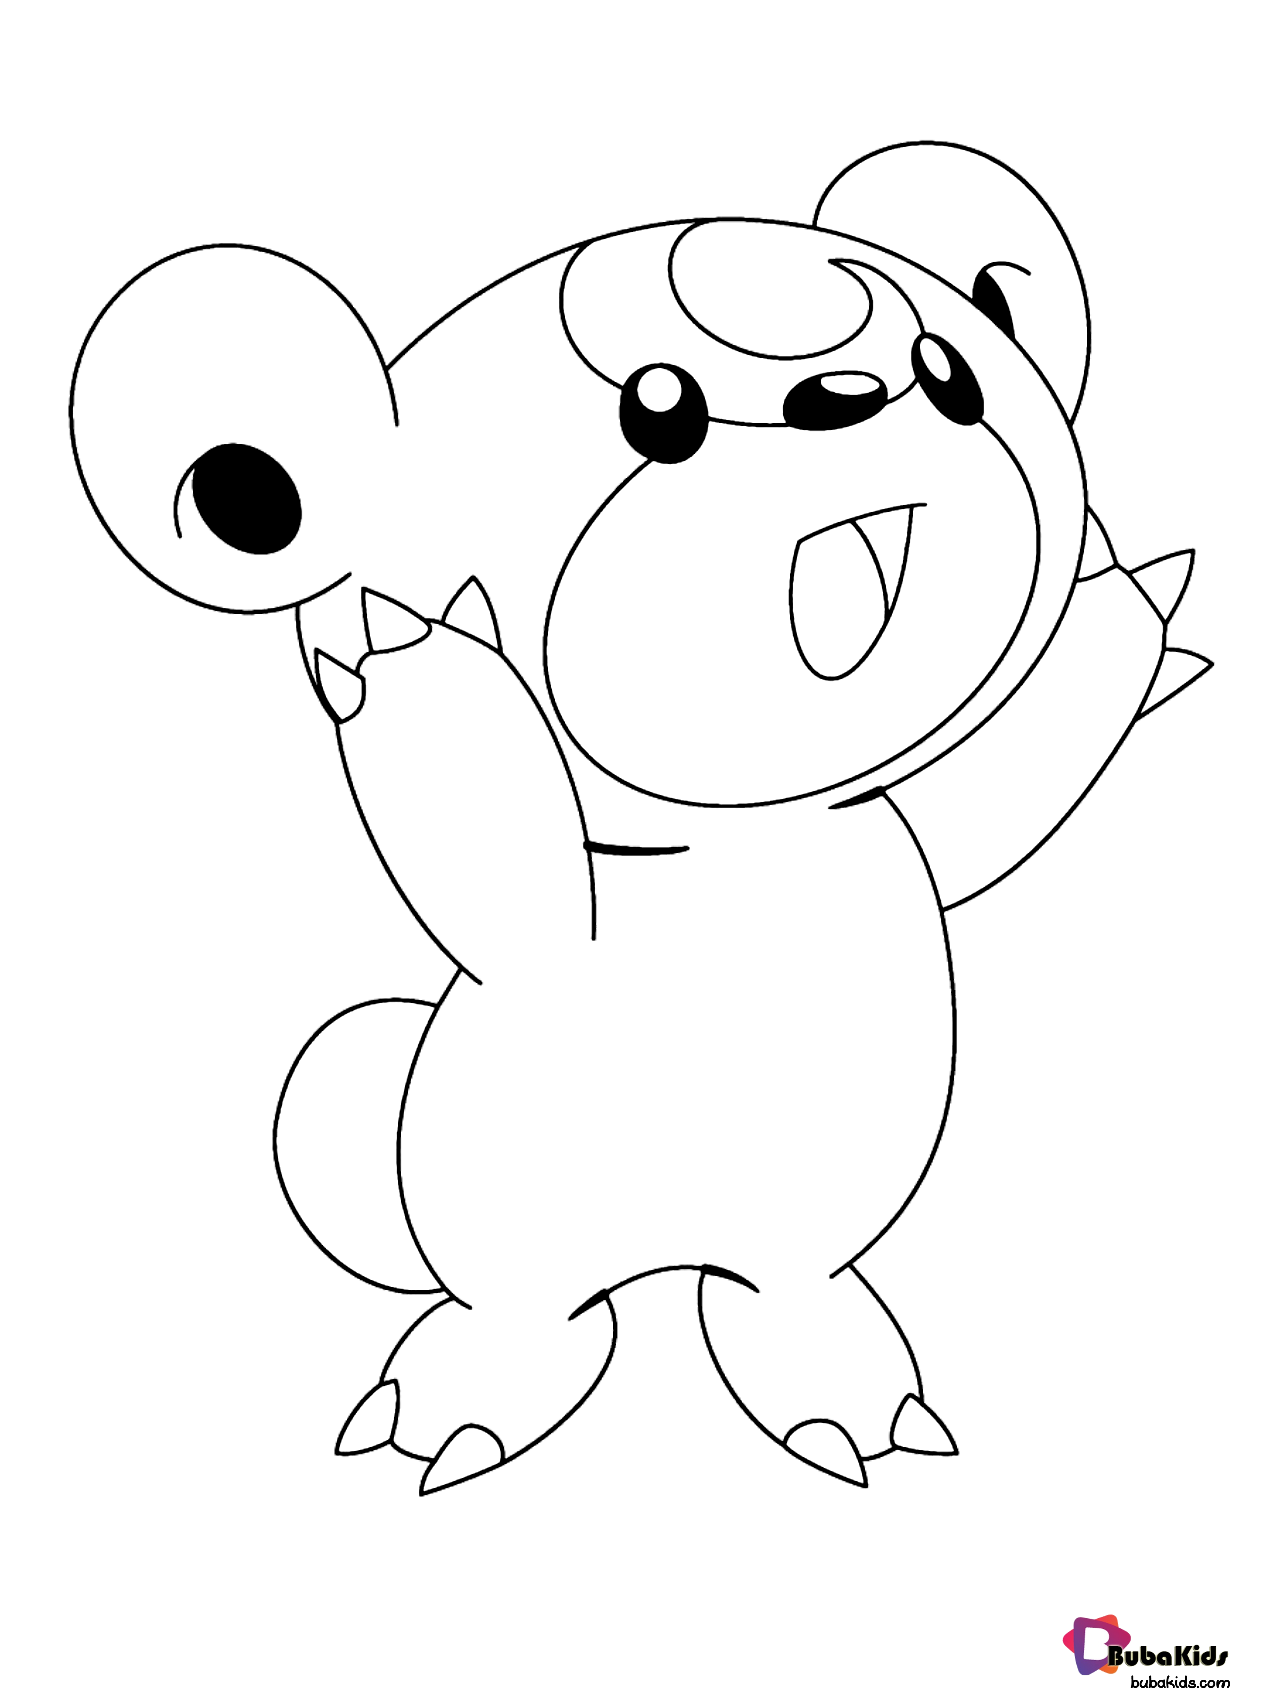 Easy pokemon coloring page for toddlers Wallpaper